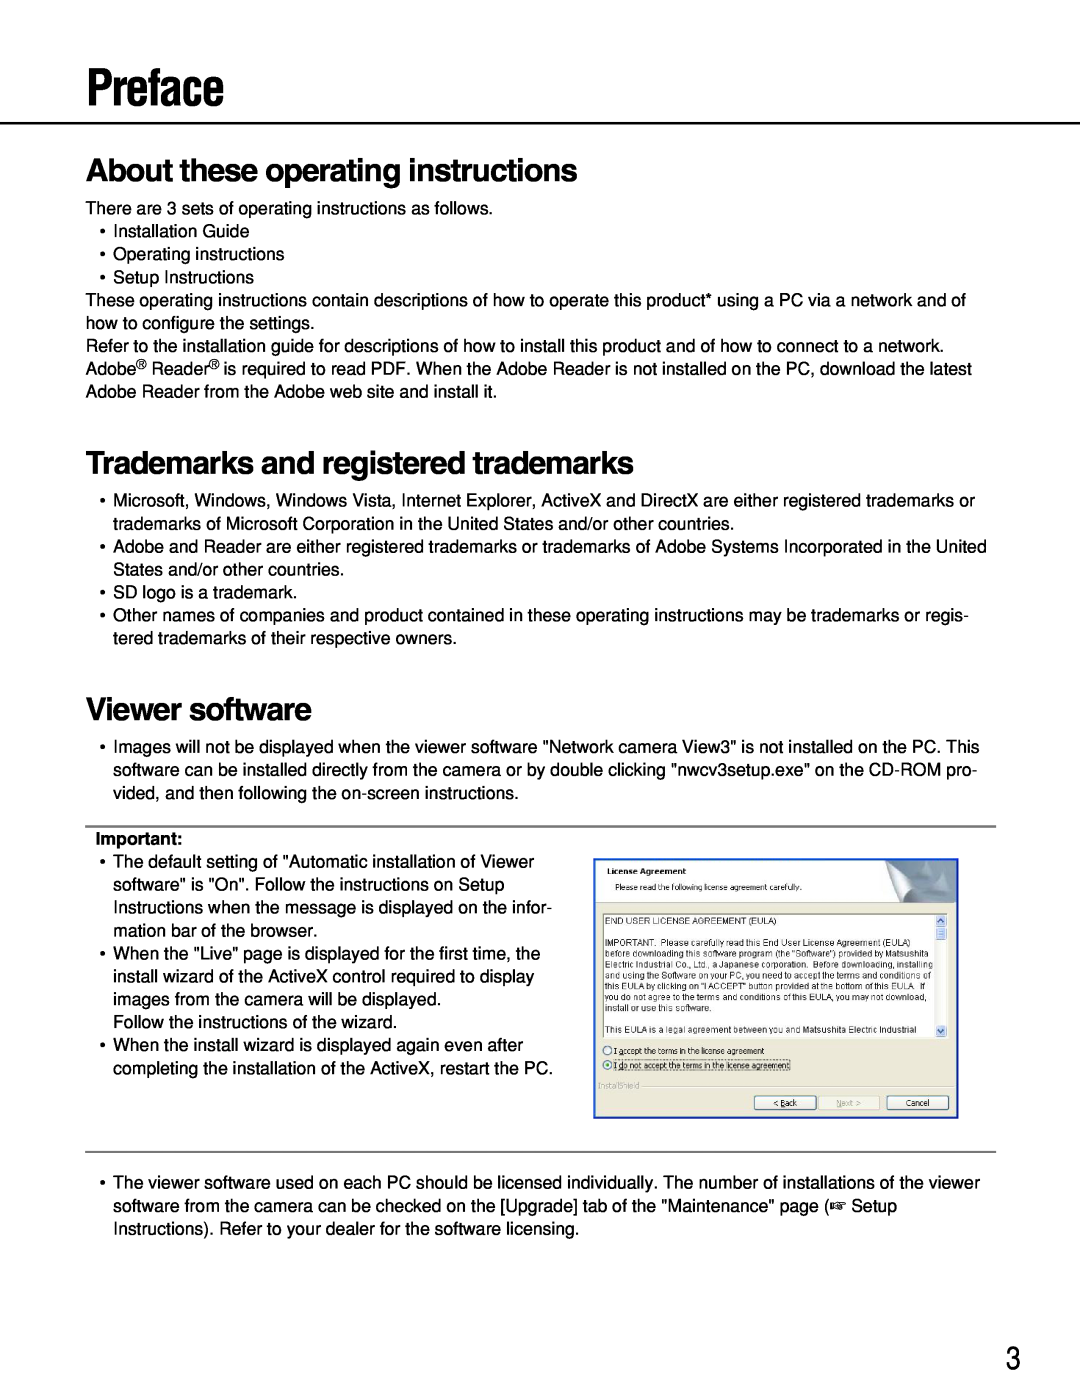 Panasonic WV-NP304 Preface, About these operating instructions, Trademarks and registered trademarks, Viewer software 